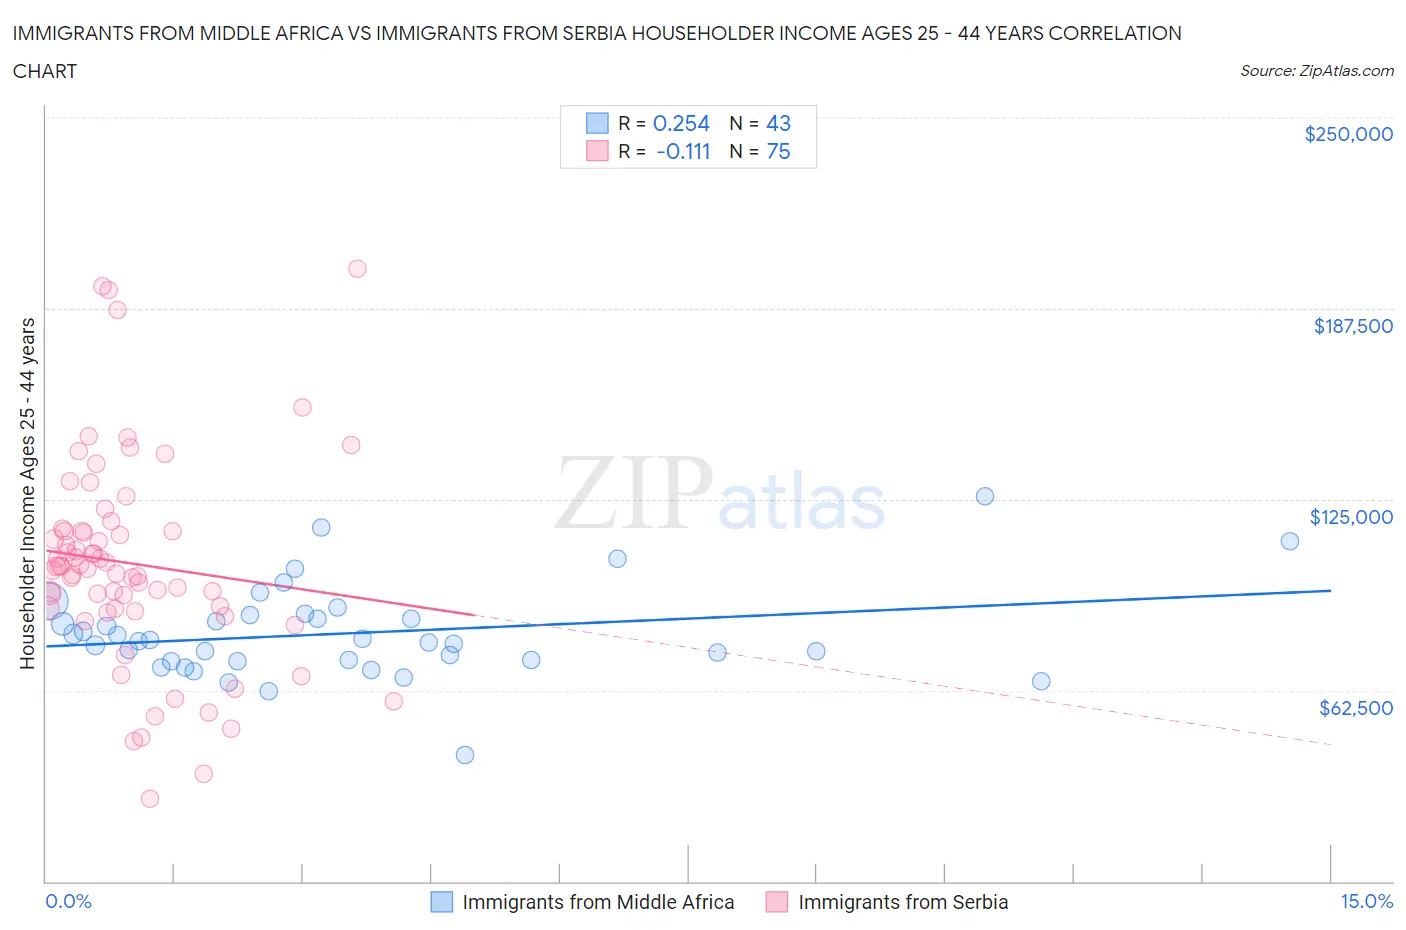 Immigrants from Middle Africa vs Immigrants from Serbia Householder Income Ages 25 - 44 years